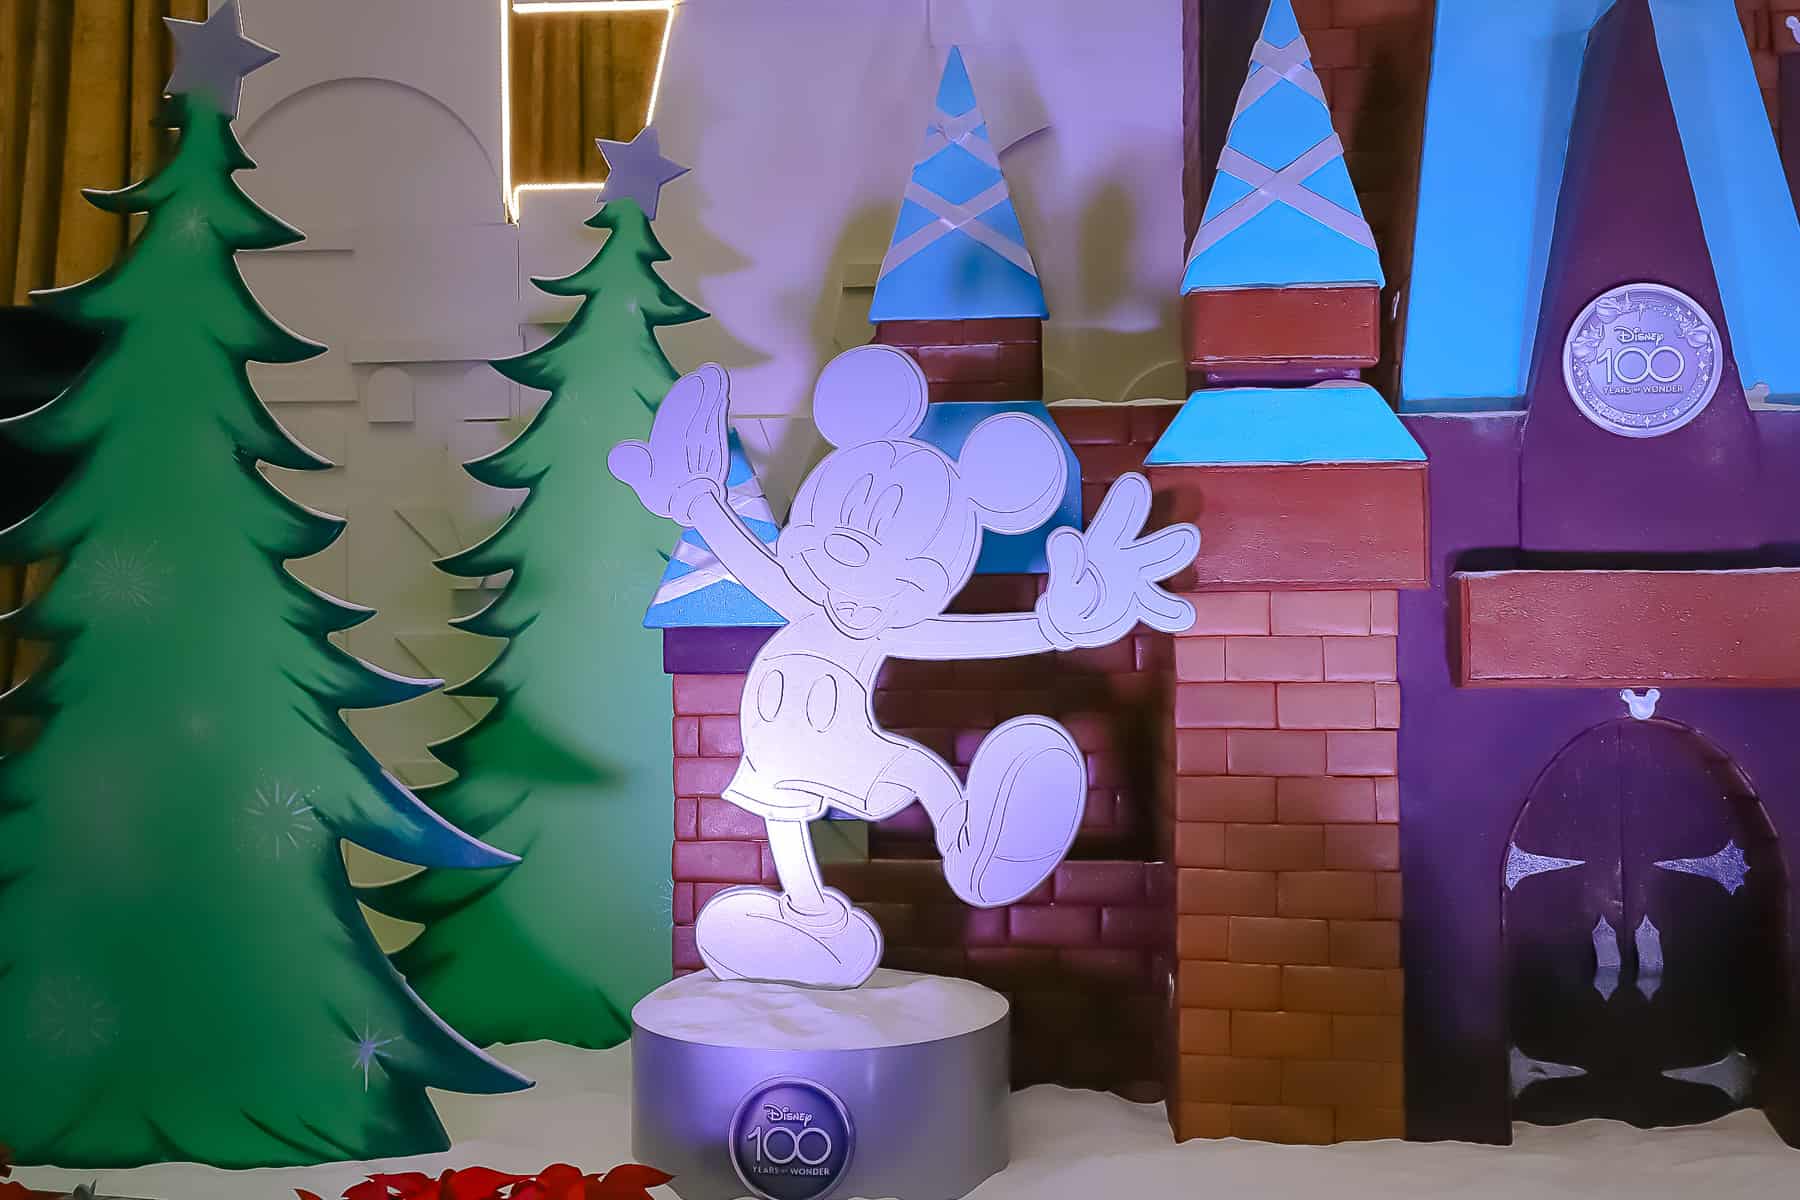 zoomed in view of Mickey with a Disney100 emblem